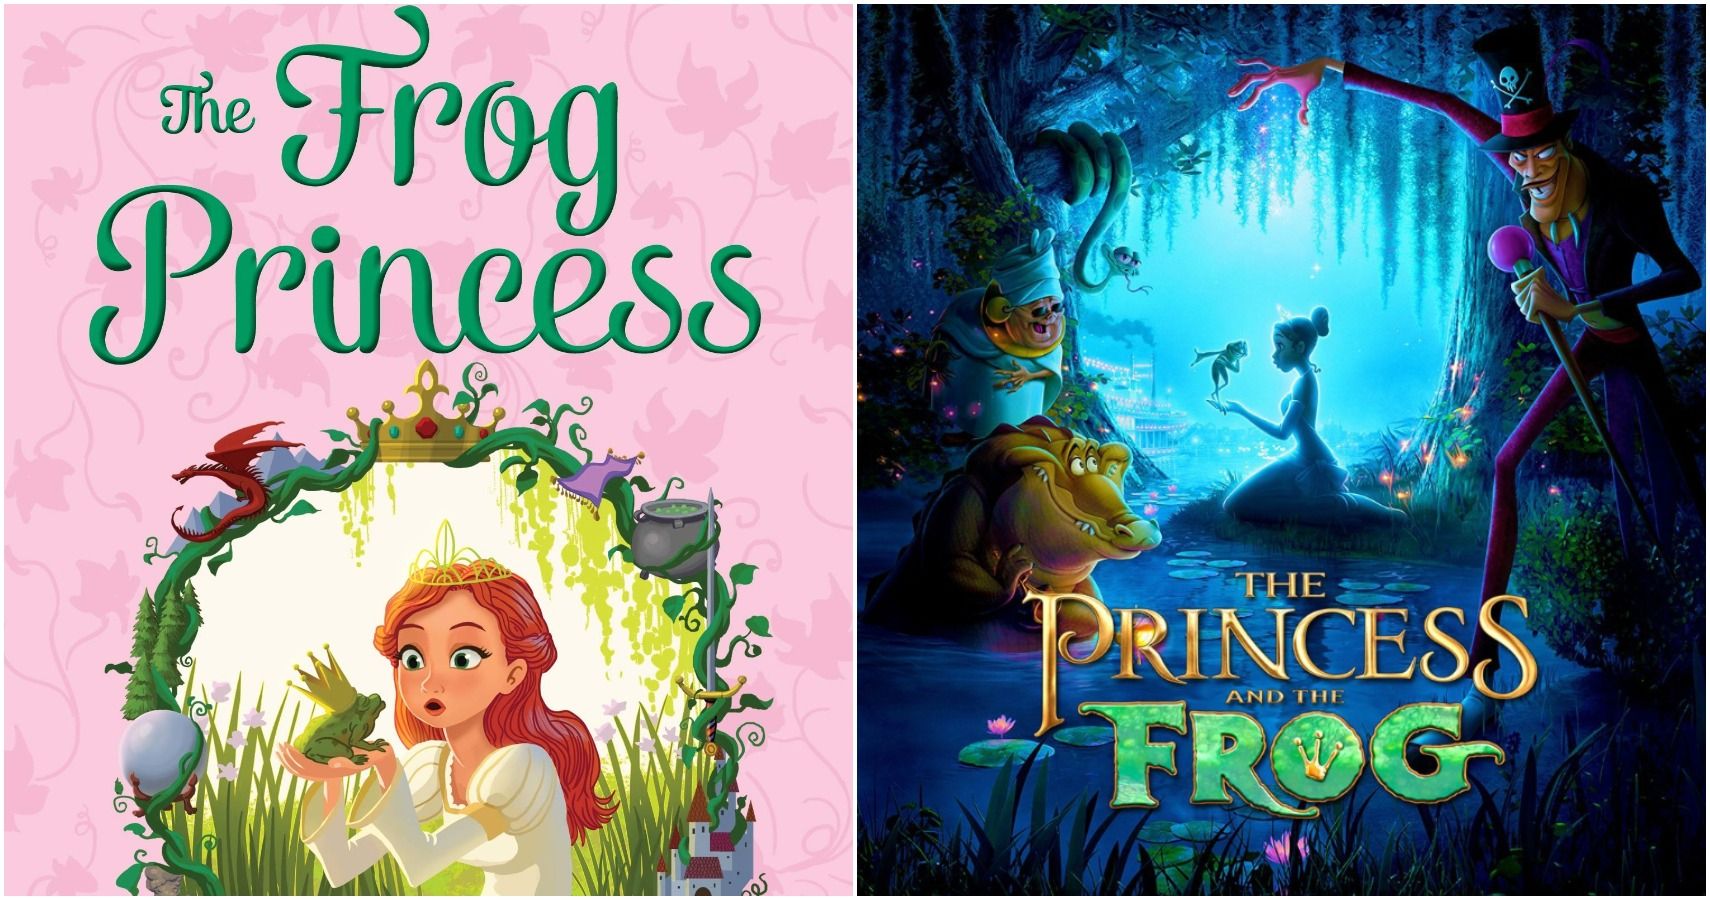 Princess & The Frog 10 Biggest Differences Disney Made To The Original Story